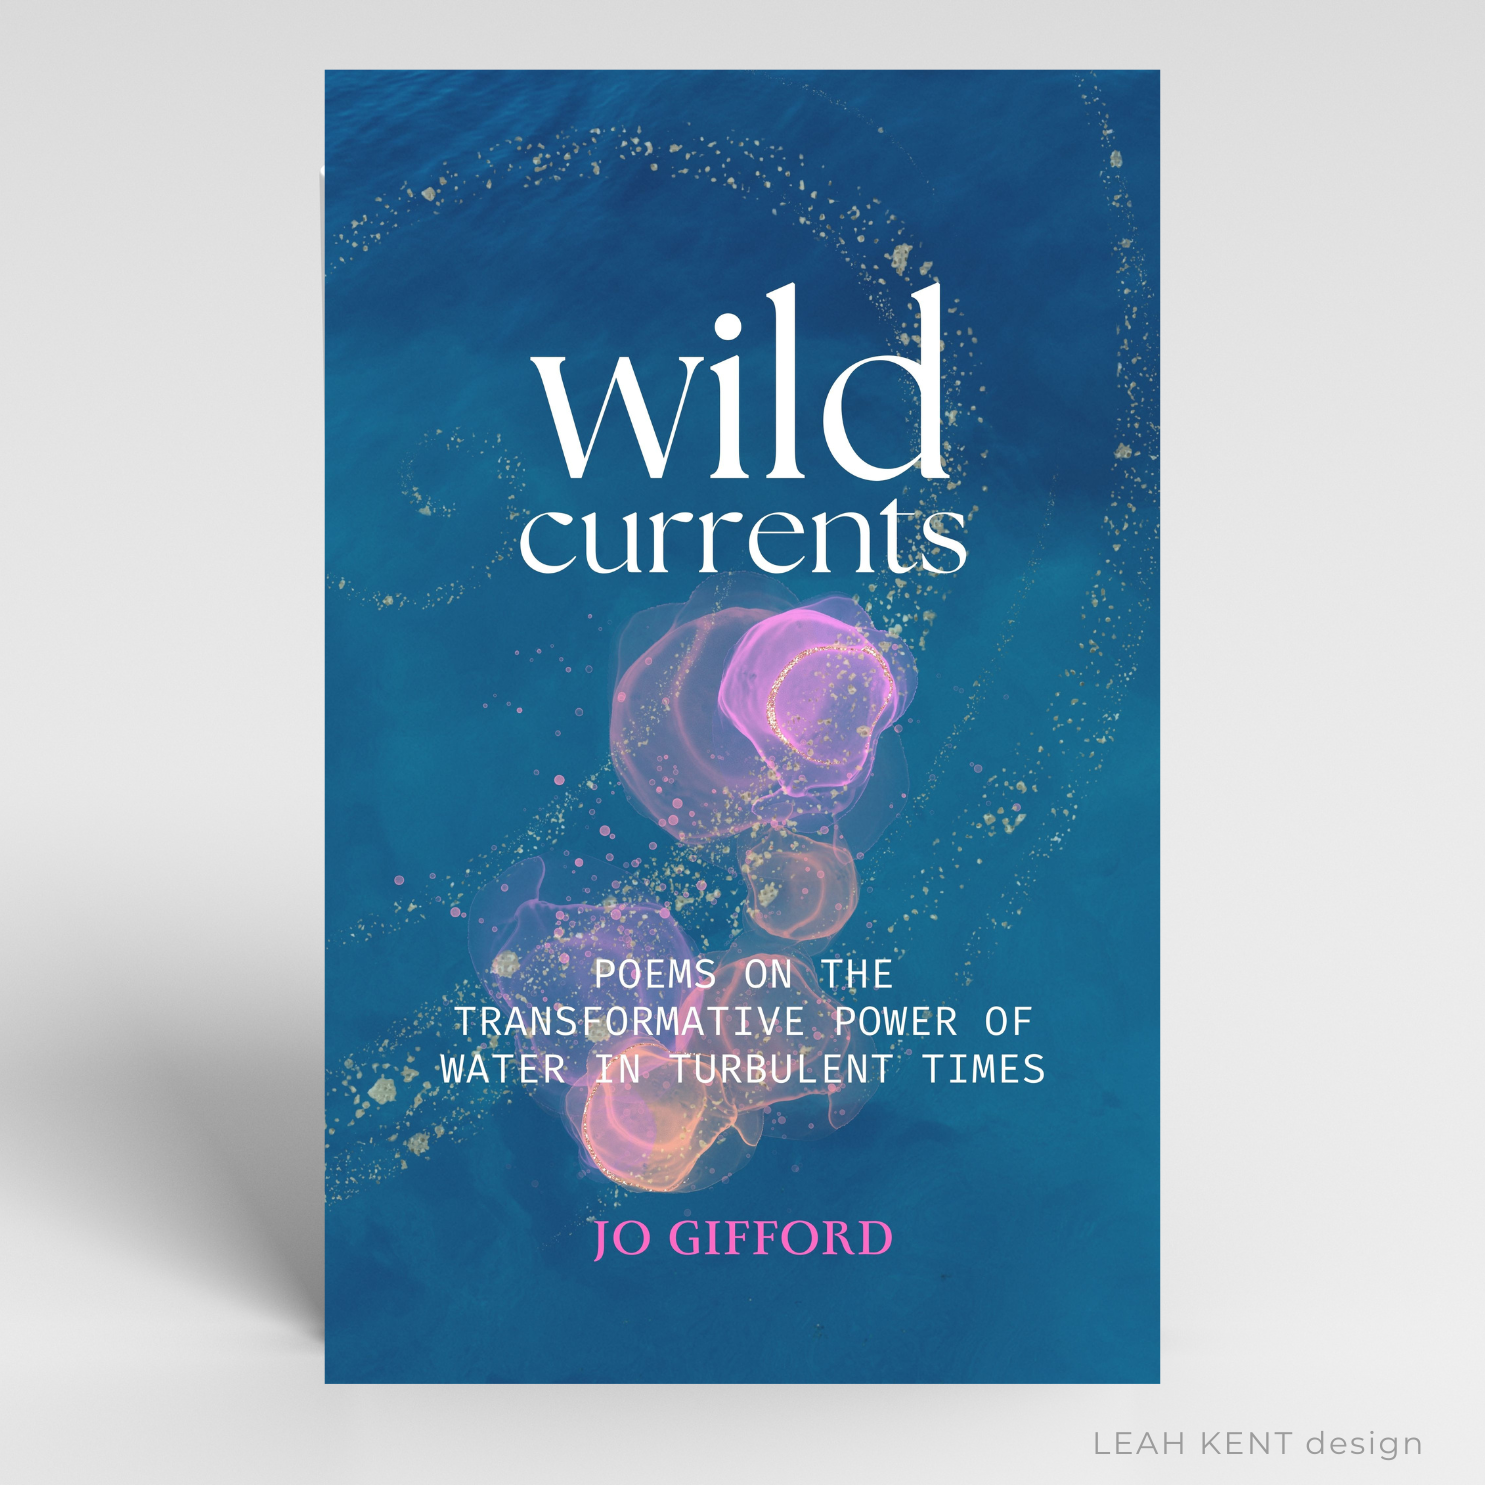 Wild Currents by Jo Gifford